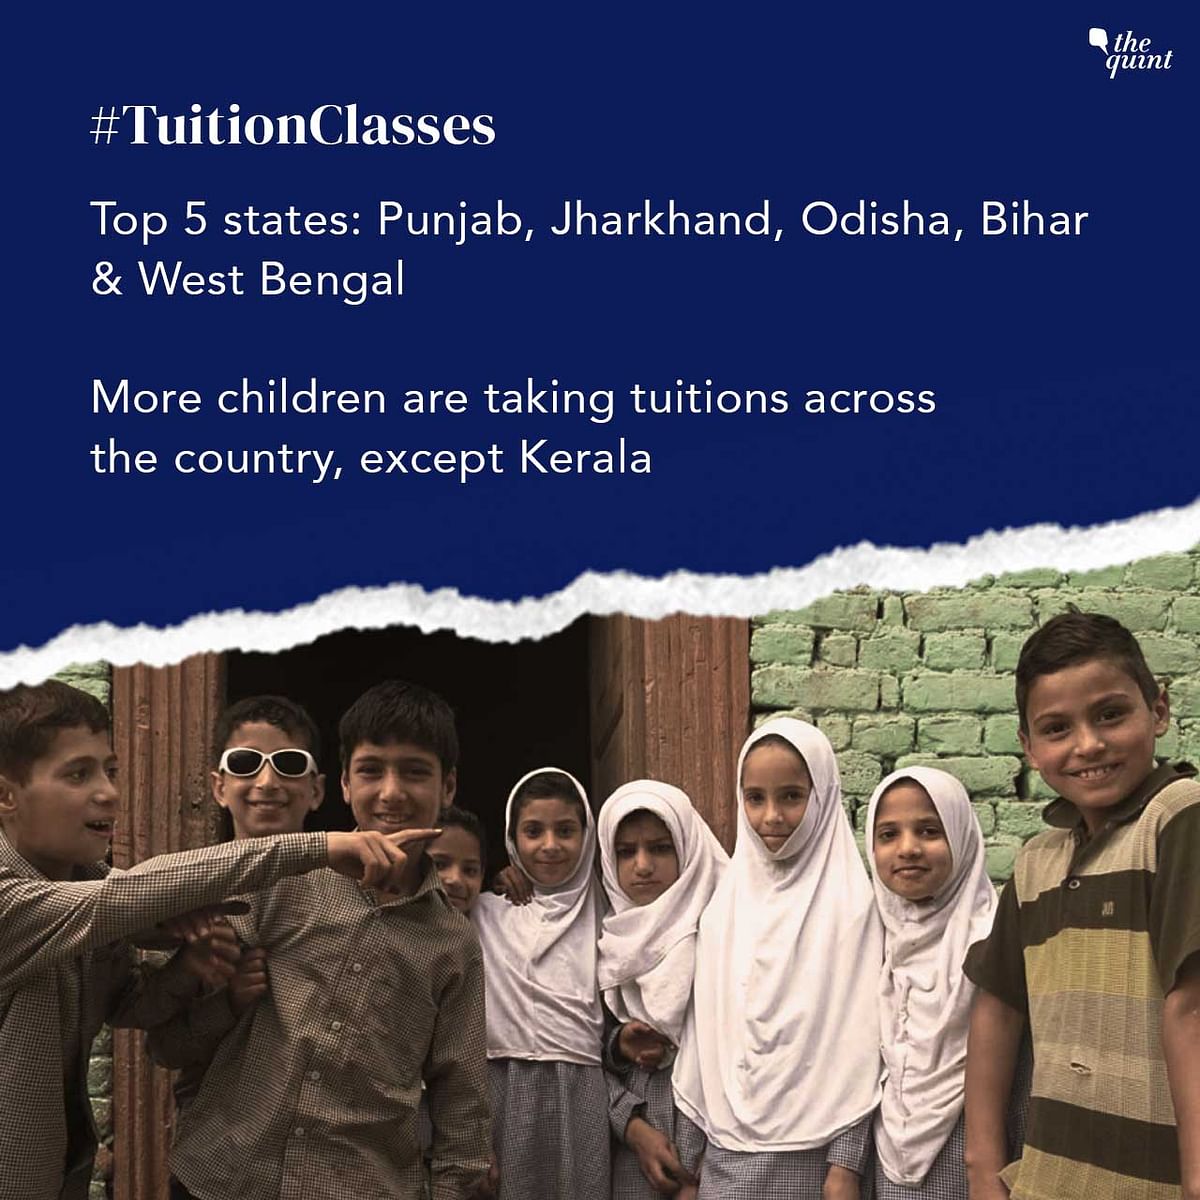 The national increase in government school enrollment is driven by states like UP, Rajasthan, and Punjab.